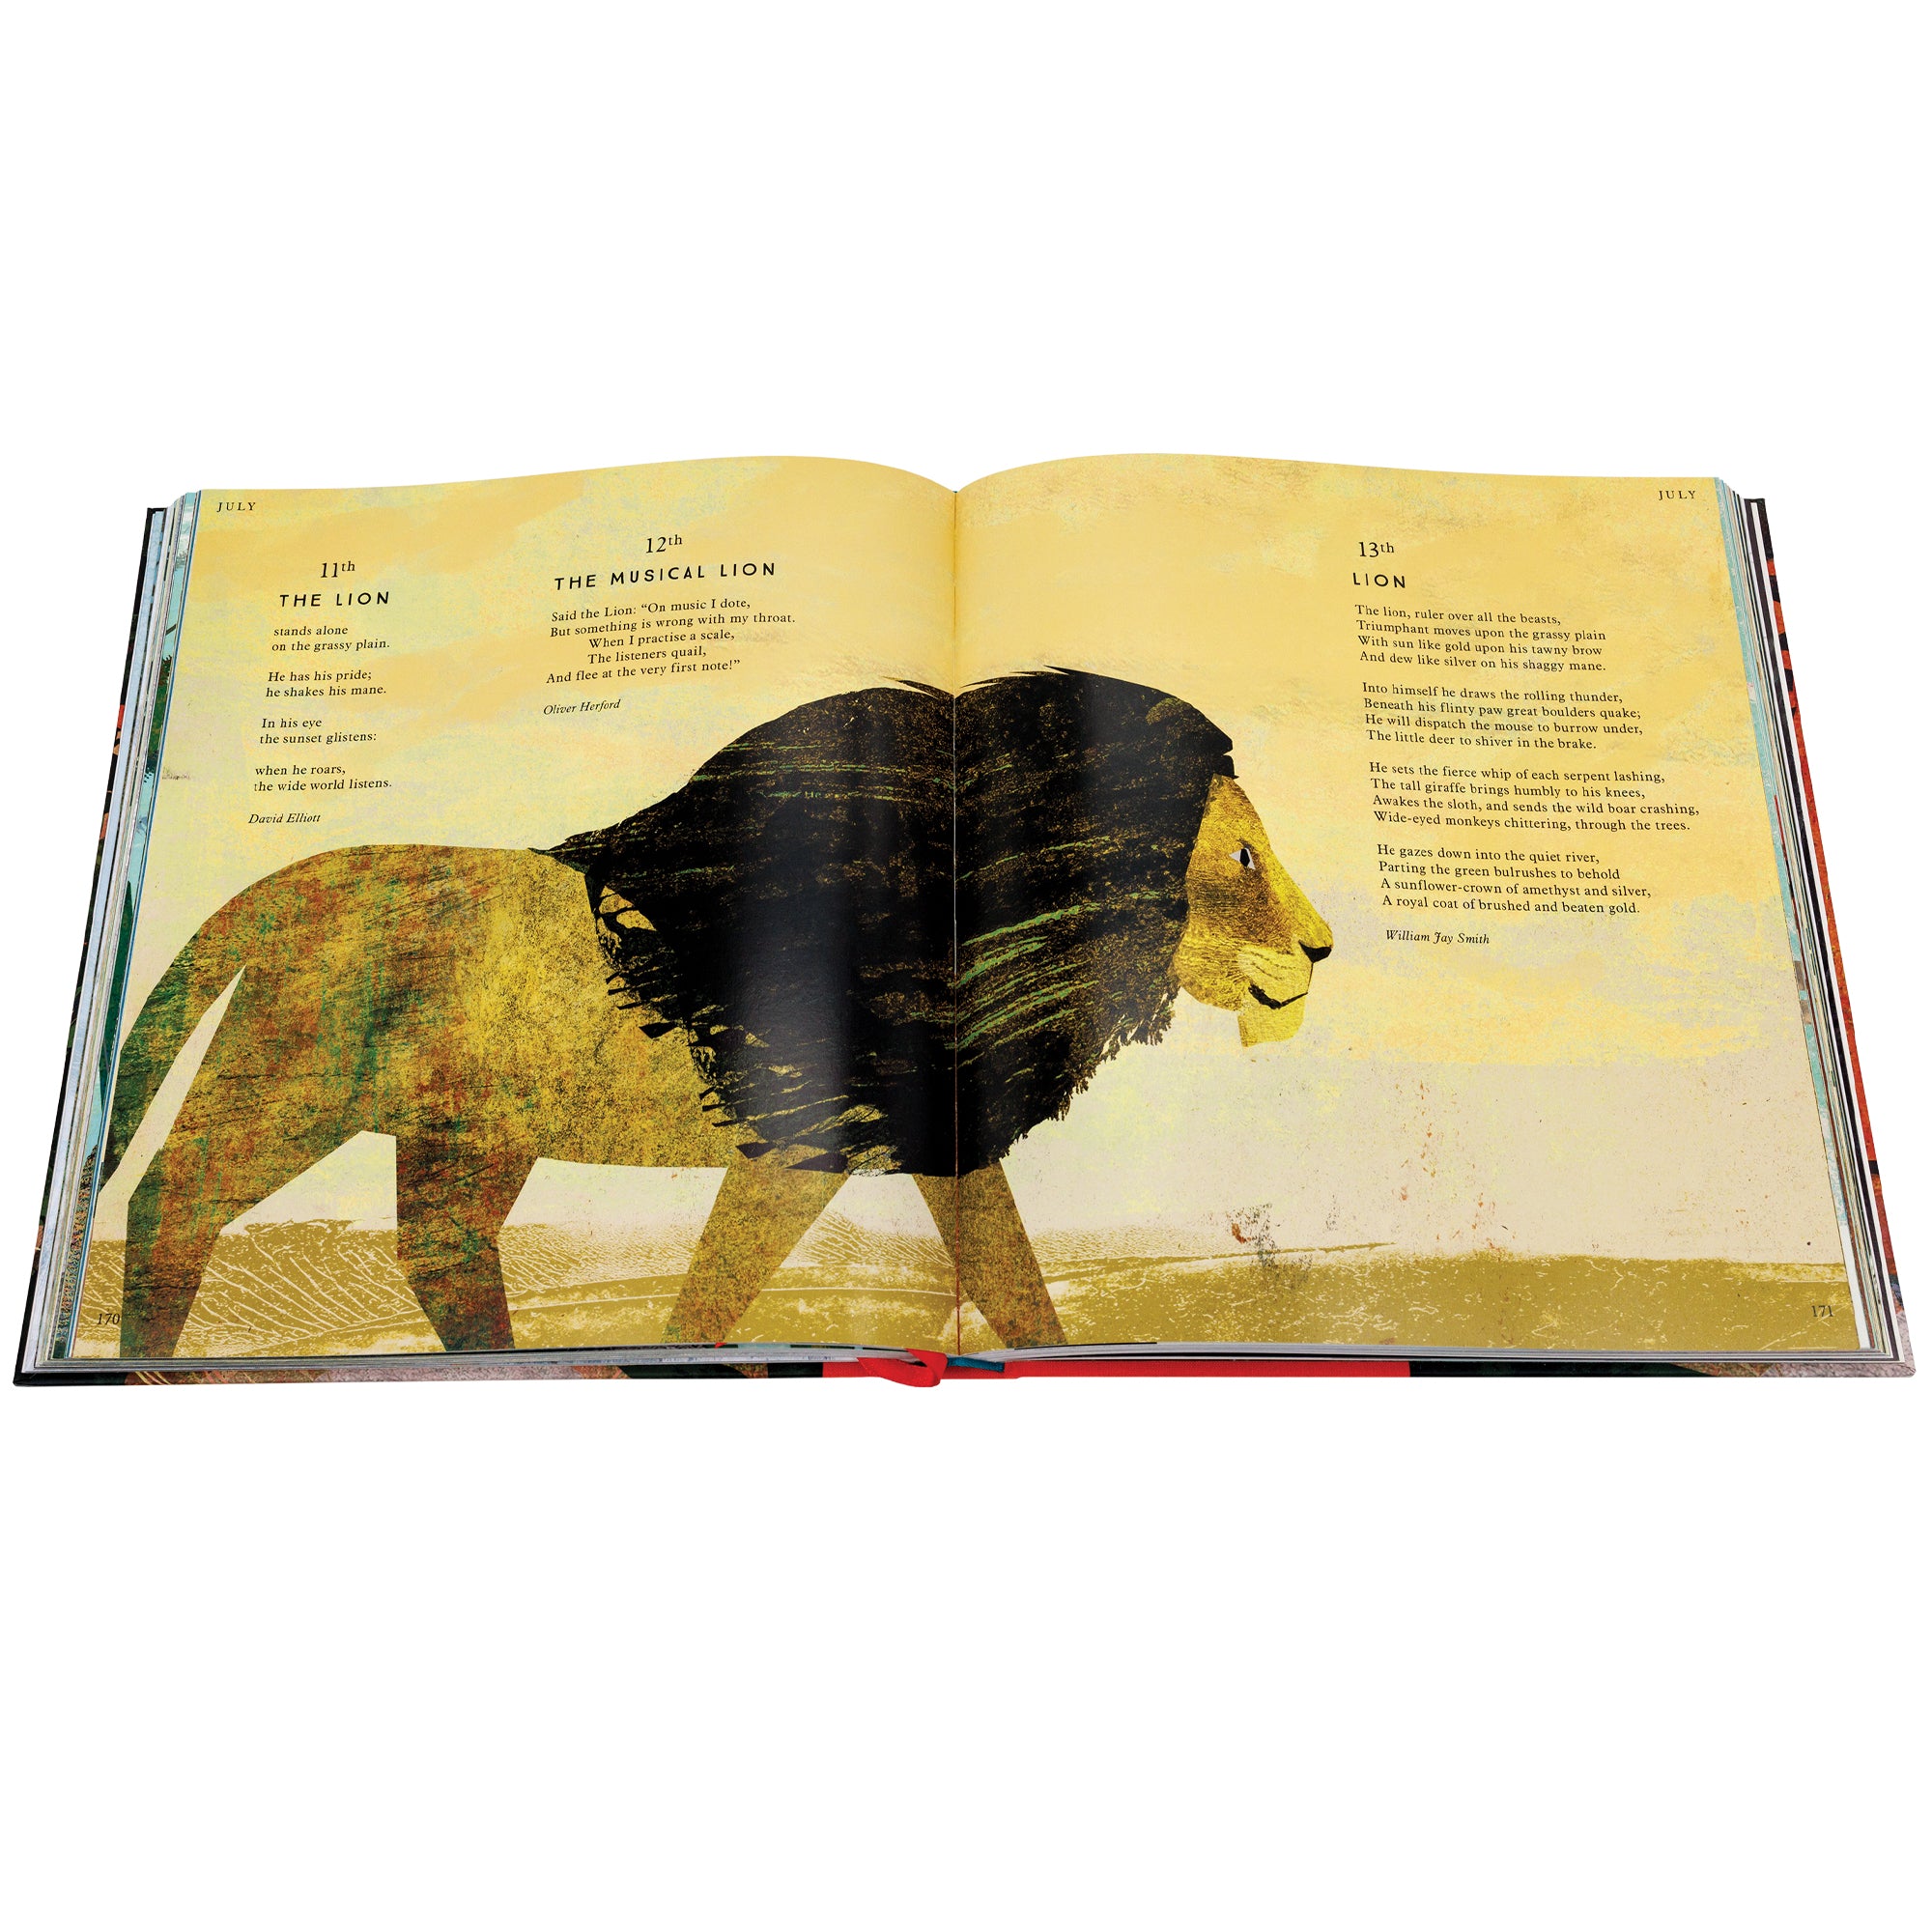 Tiger, Tiger, Burning Bright book open to show 3 poems titled "The Lion,” “The Musical Lion,” and “Lion.” The illustration shows a lion walking across an African desert. The coloring is mostly dark yellow and appears to be watercolor.